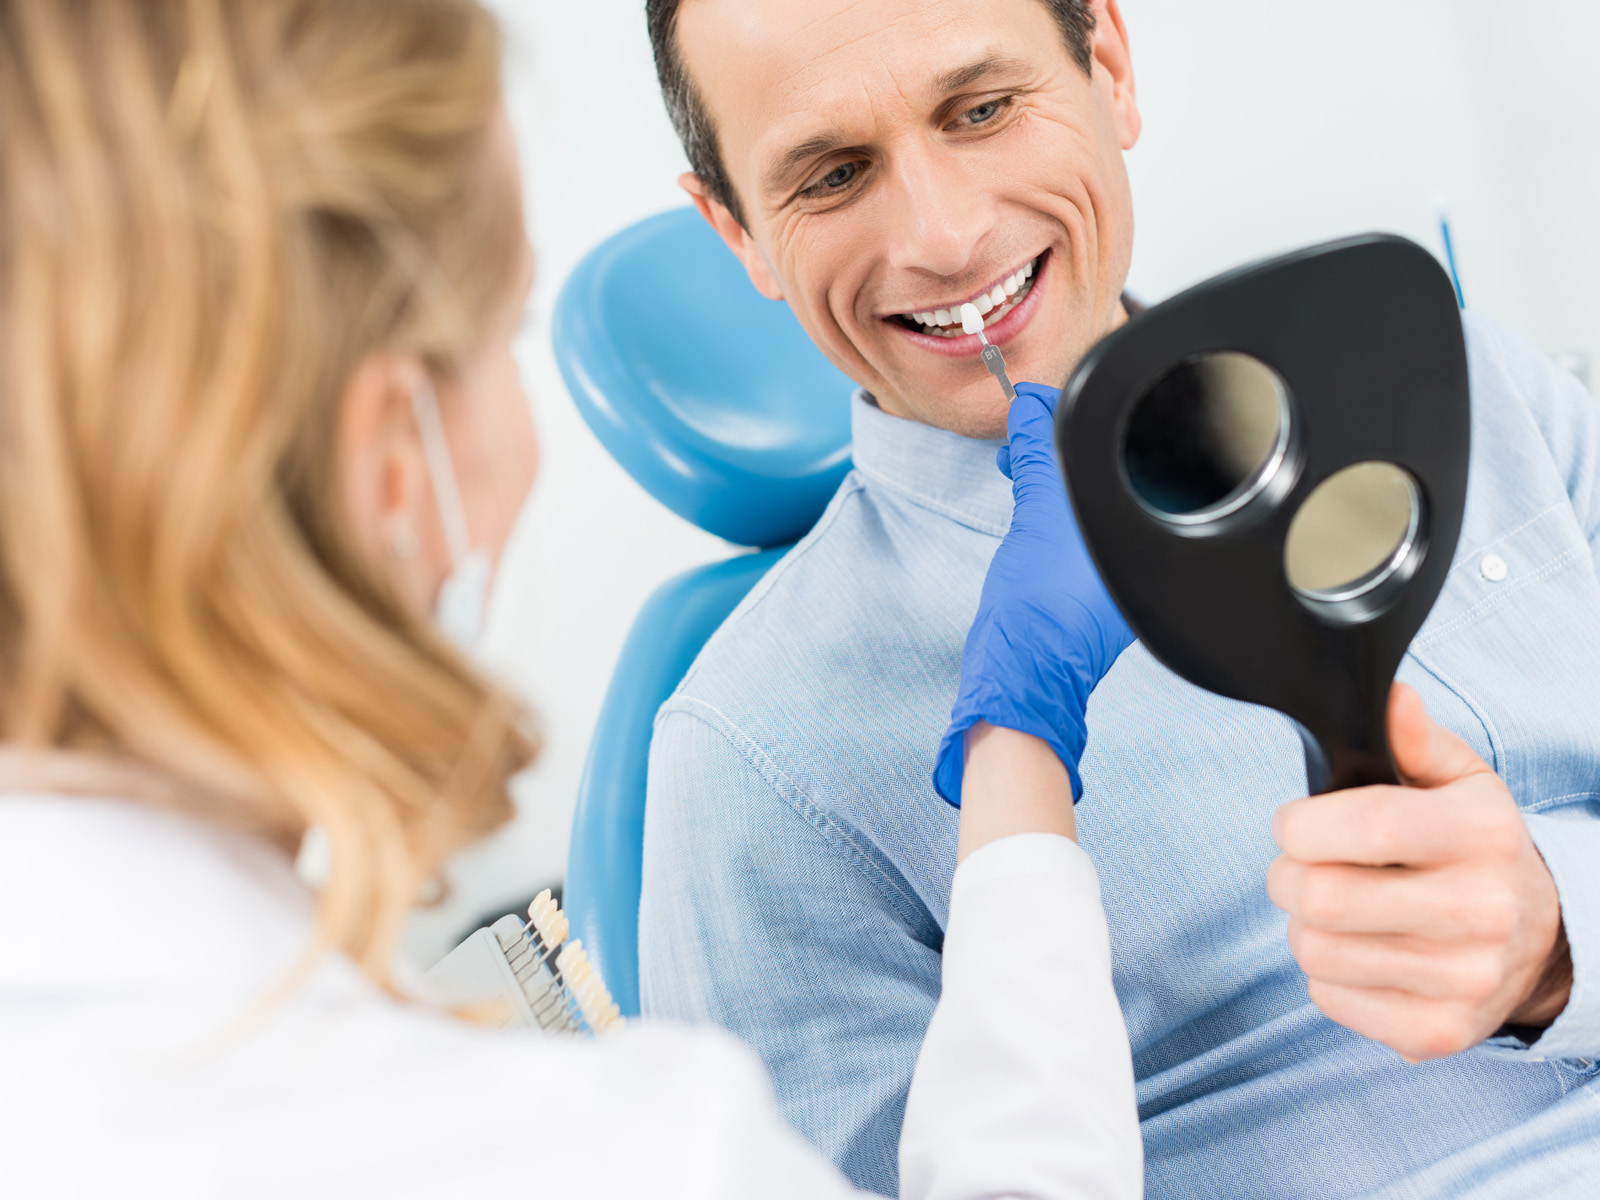 What to know when looking for affordable dental implants